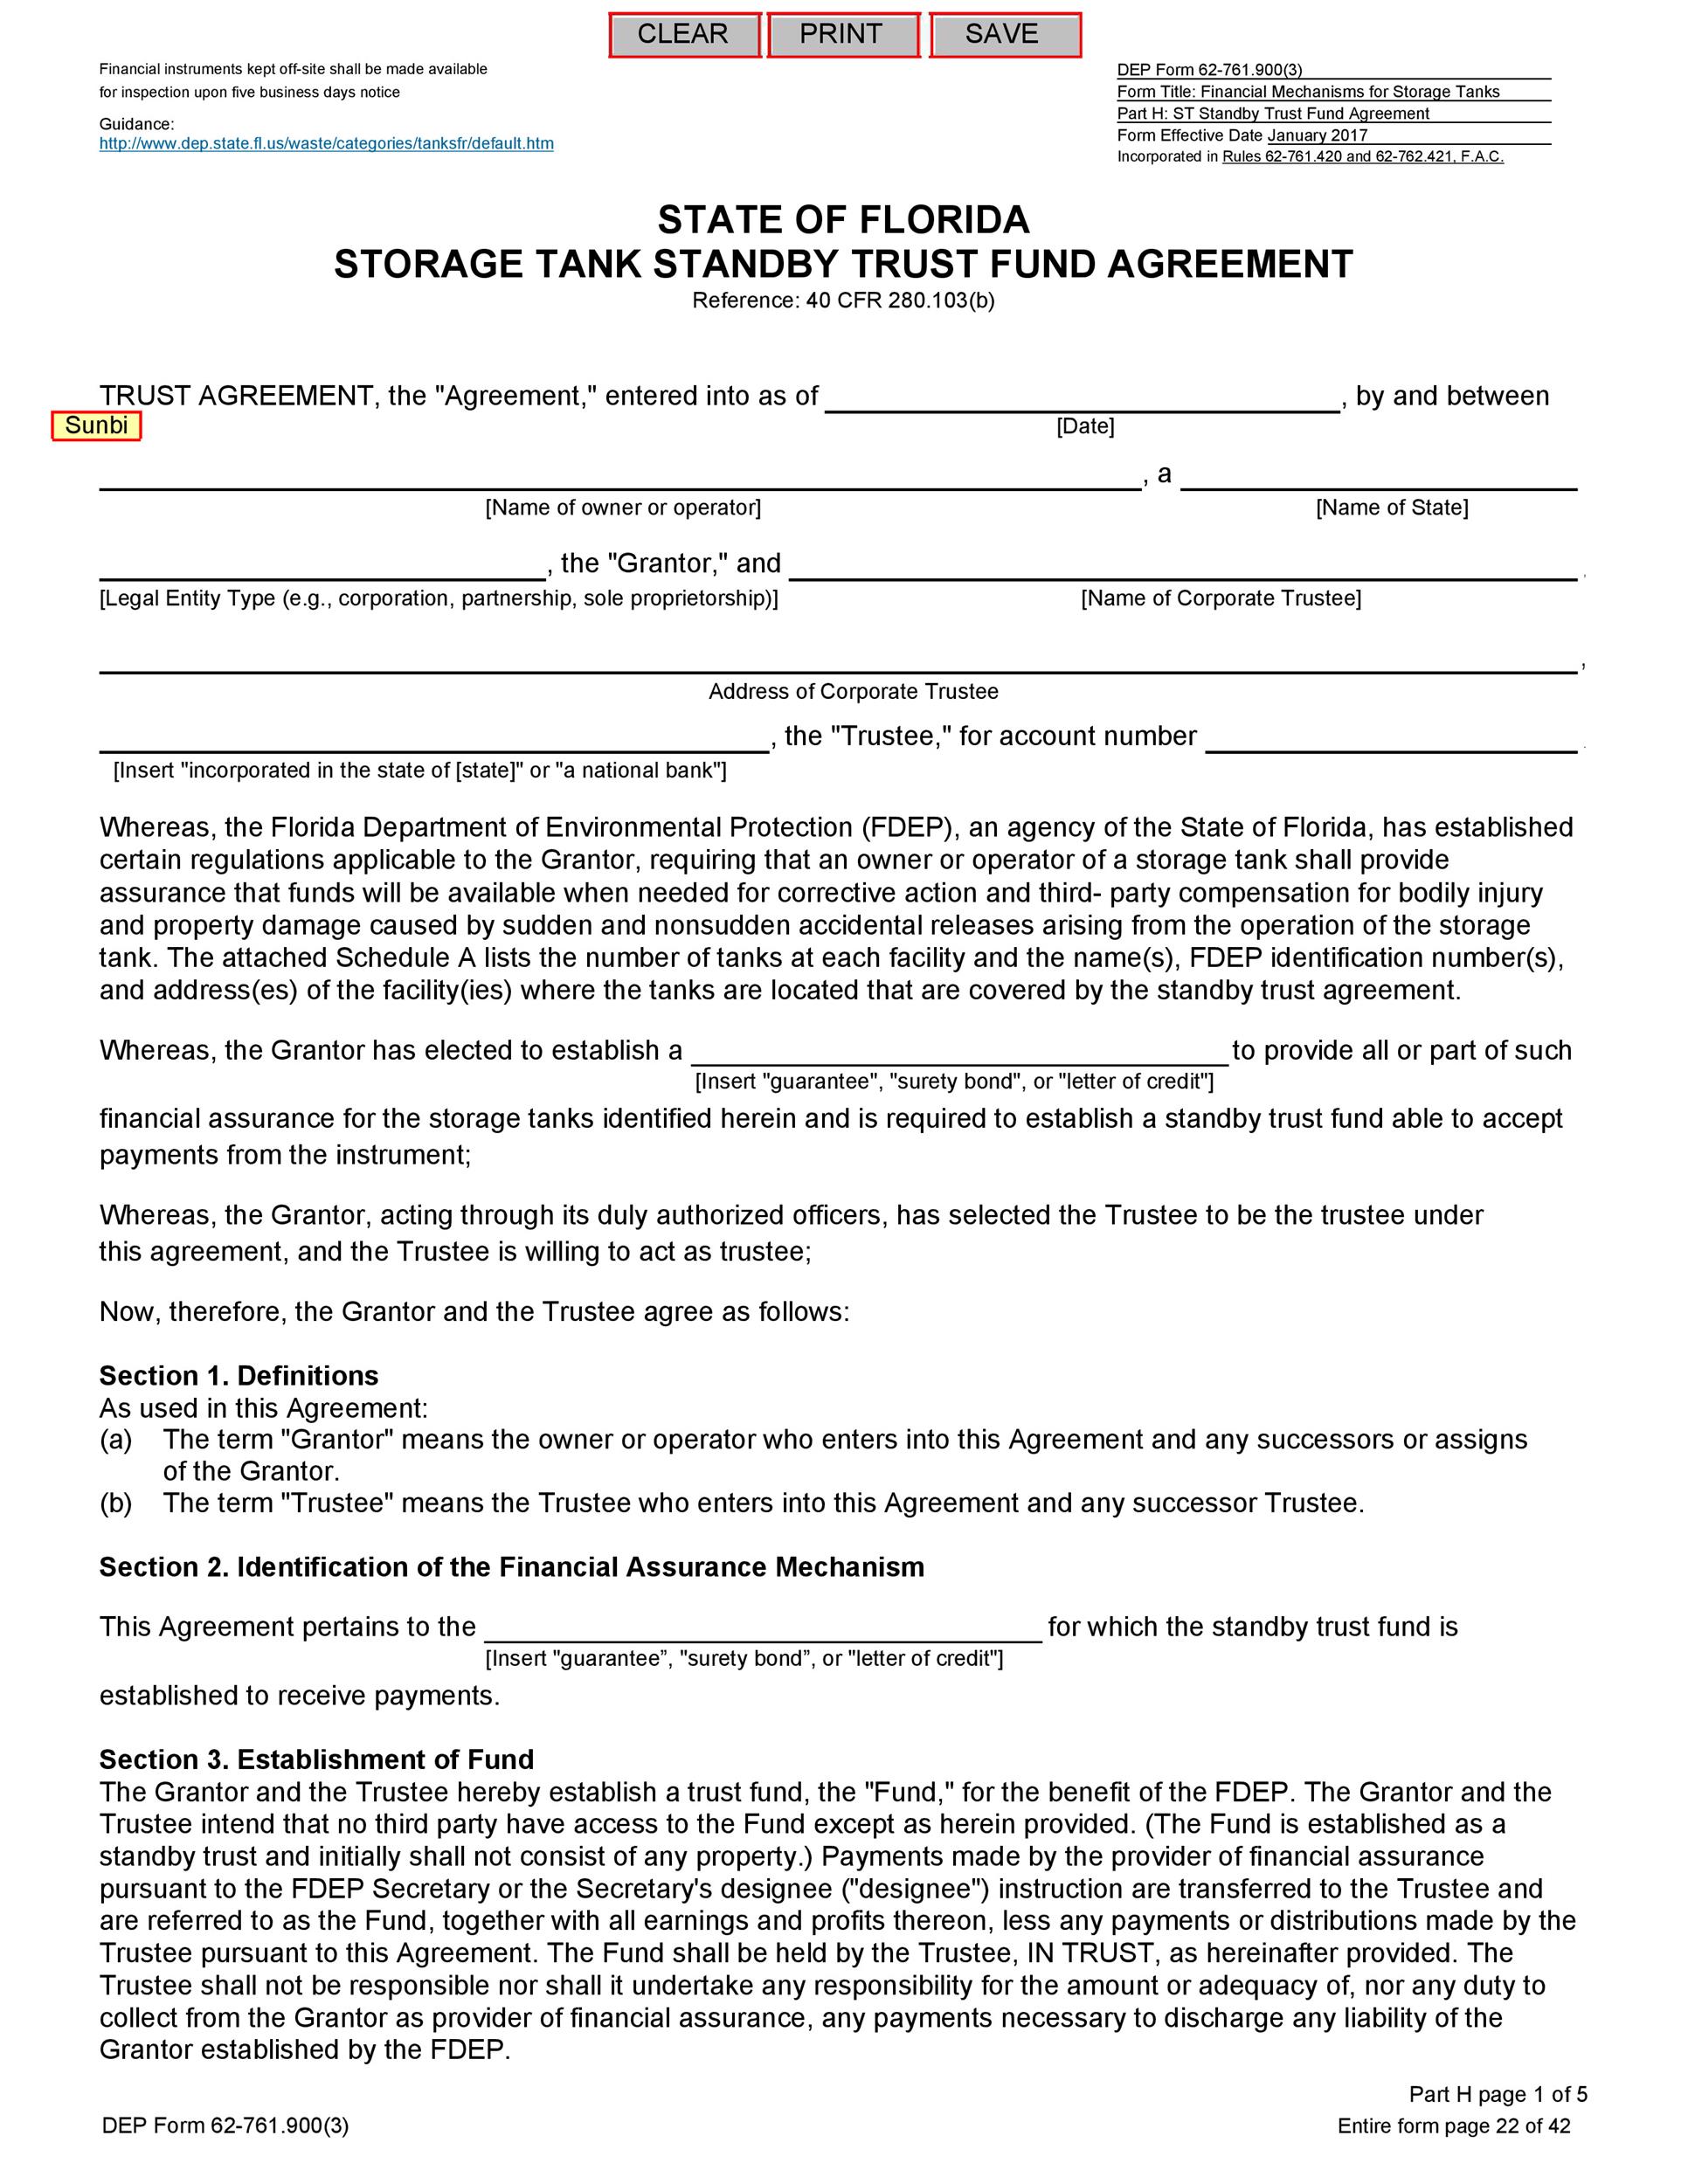 50 Professional Trust Agreement Templates Forms TemplateLab